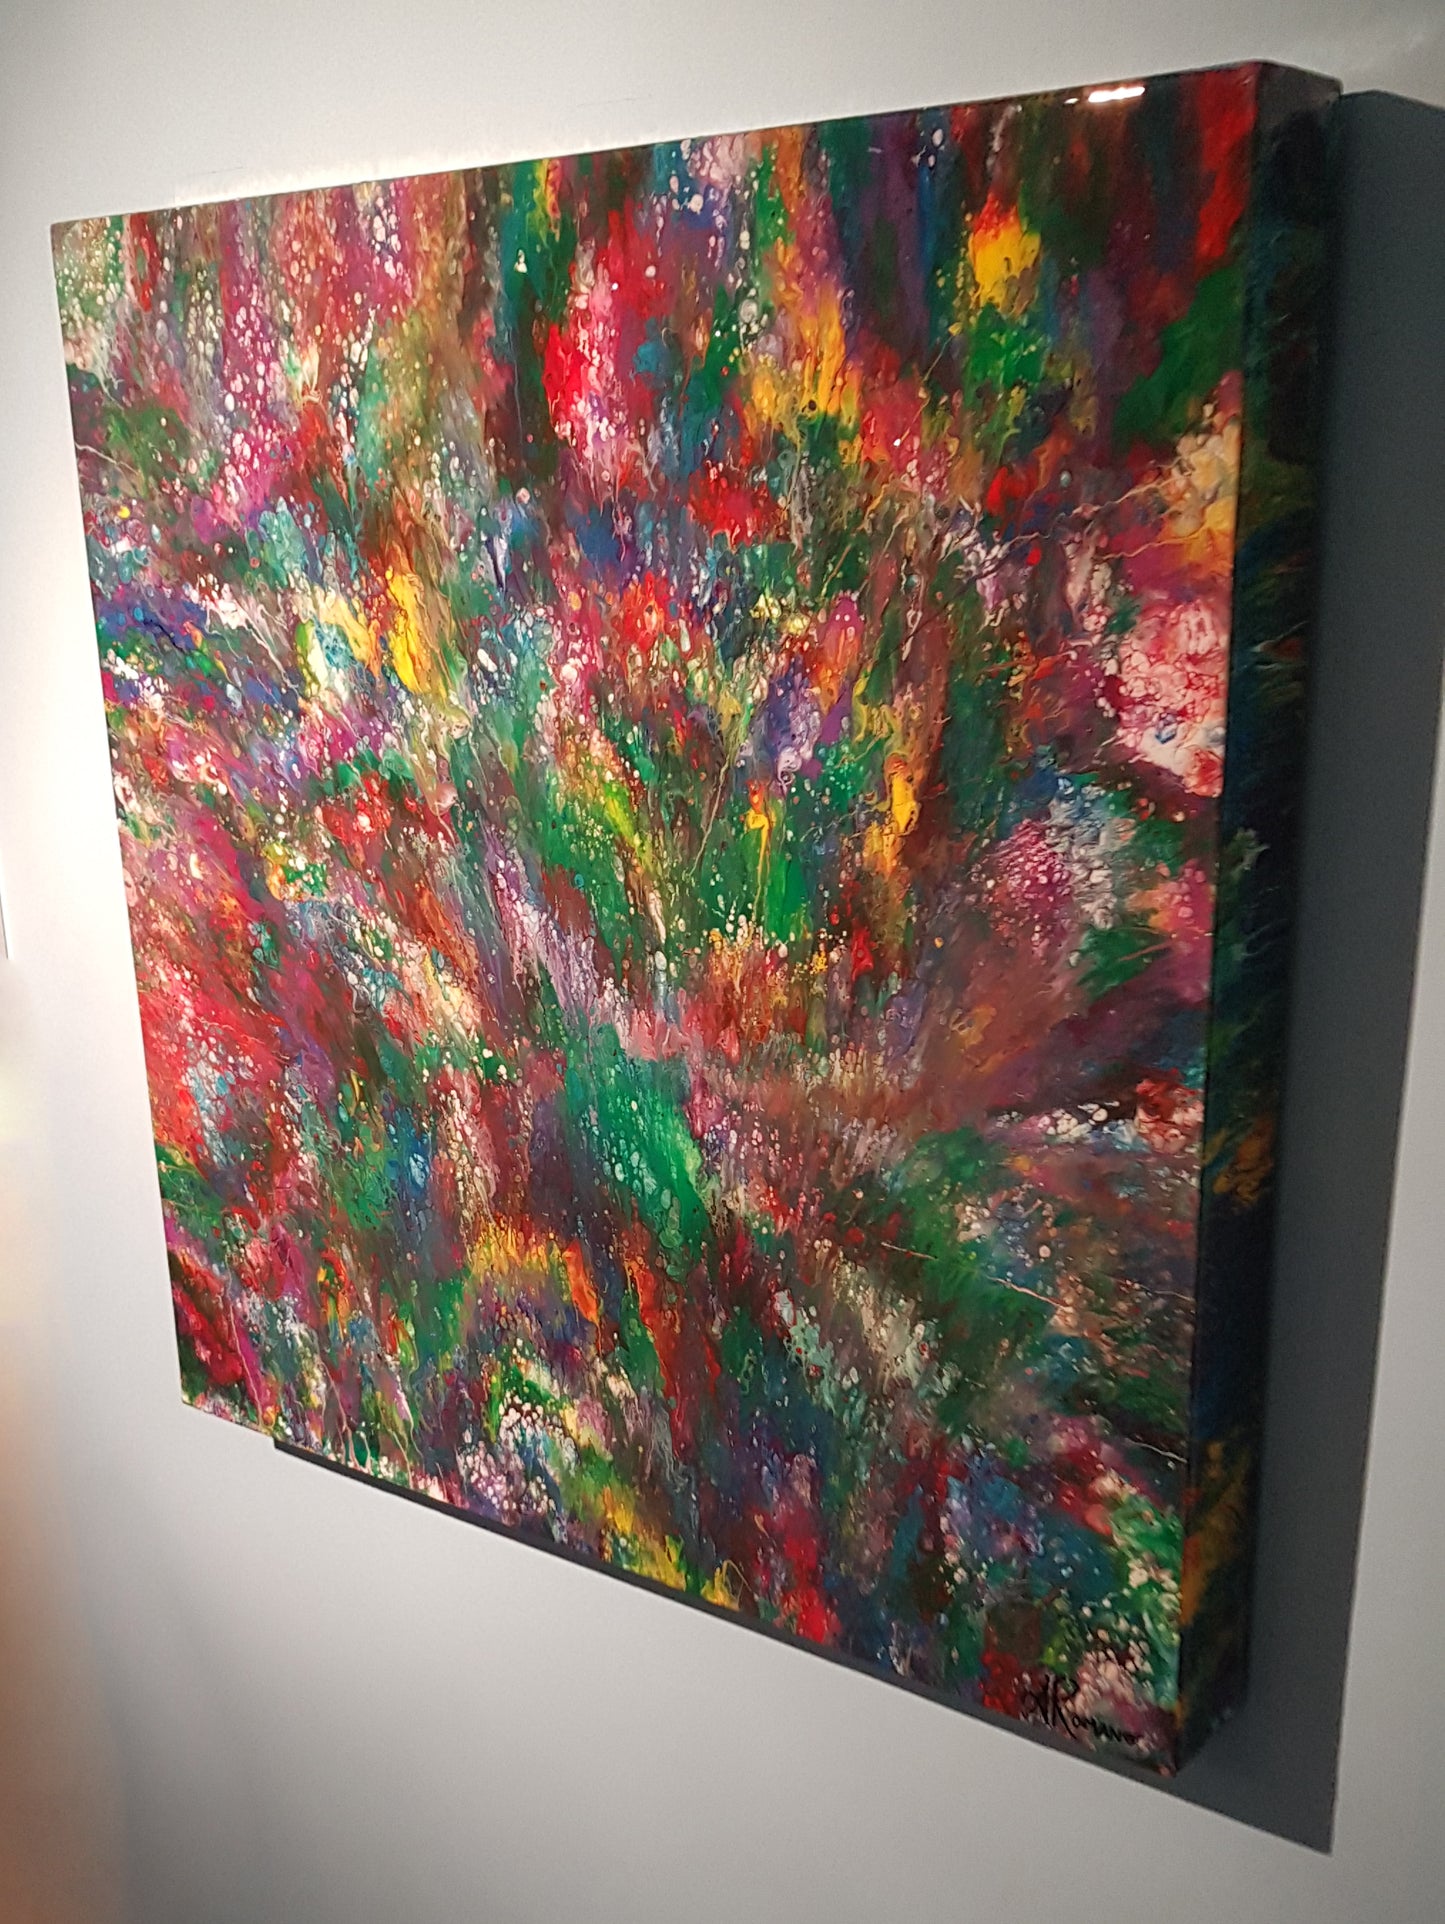 Spellbound-by-Alexandra-Romano-Original-Abstract-Paintings-for-Sale-Contemporary-Art-Gallery-Vibrant-Colourful-Statement-Piece